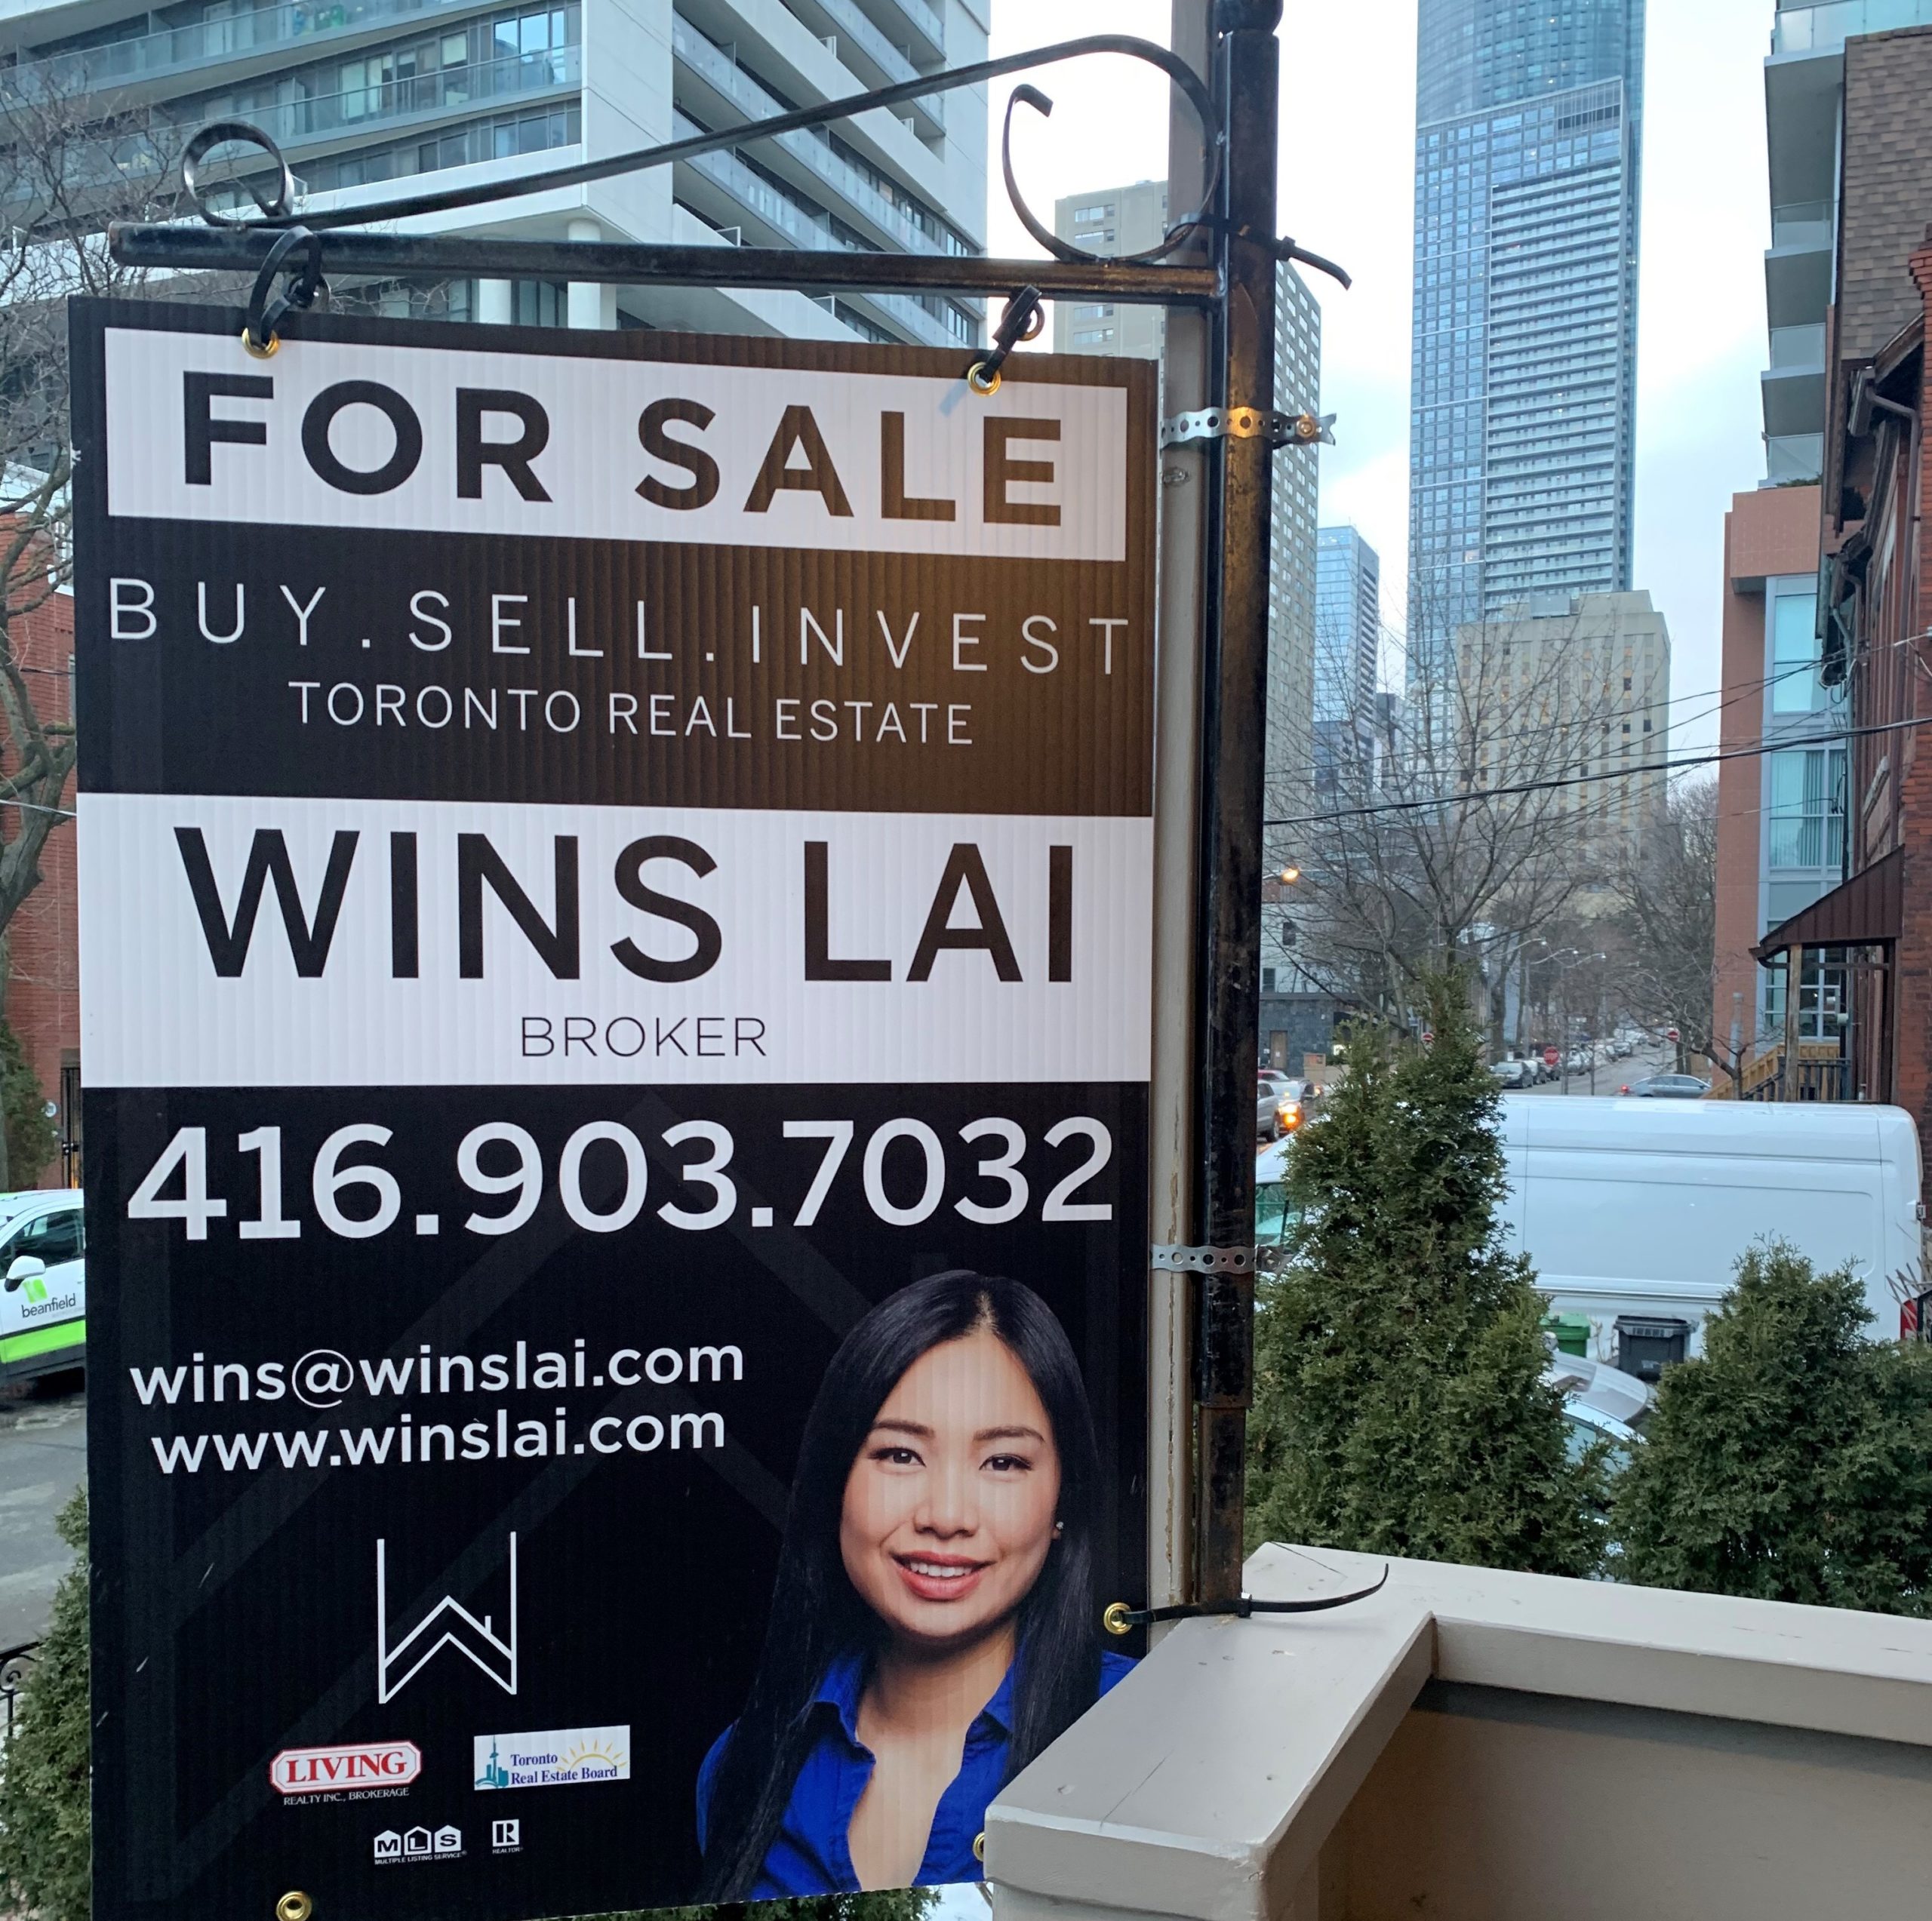 Wins Lai - Real Estate For Sale